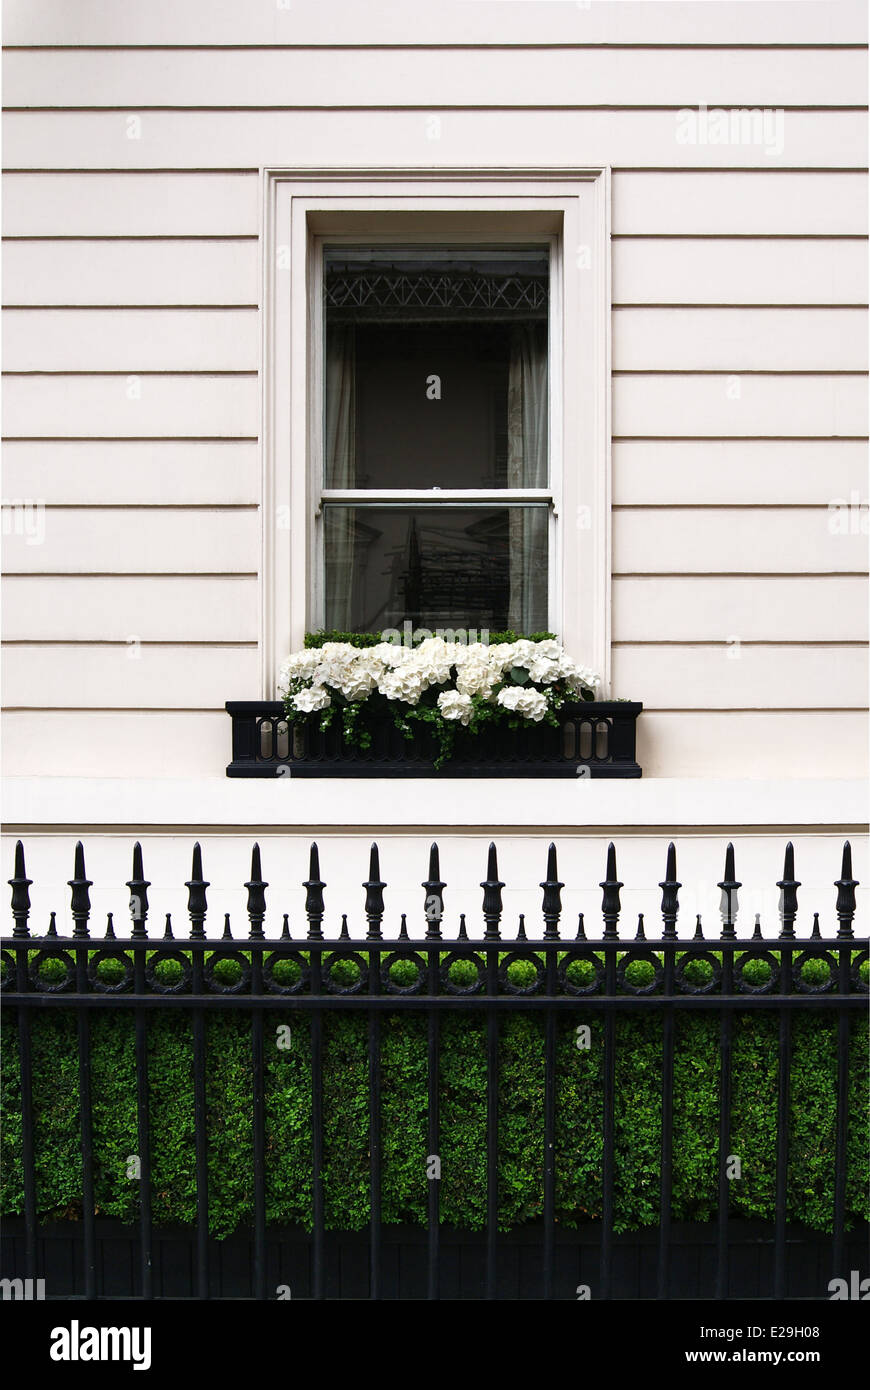 Sash Window  with wooden paneling, Ideal home capturing the fence and the wooded paneling. Stock Photo